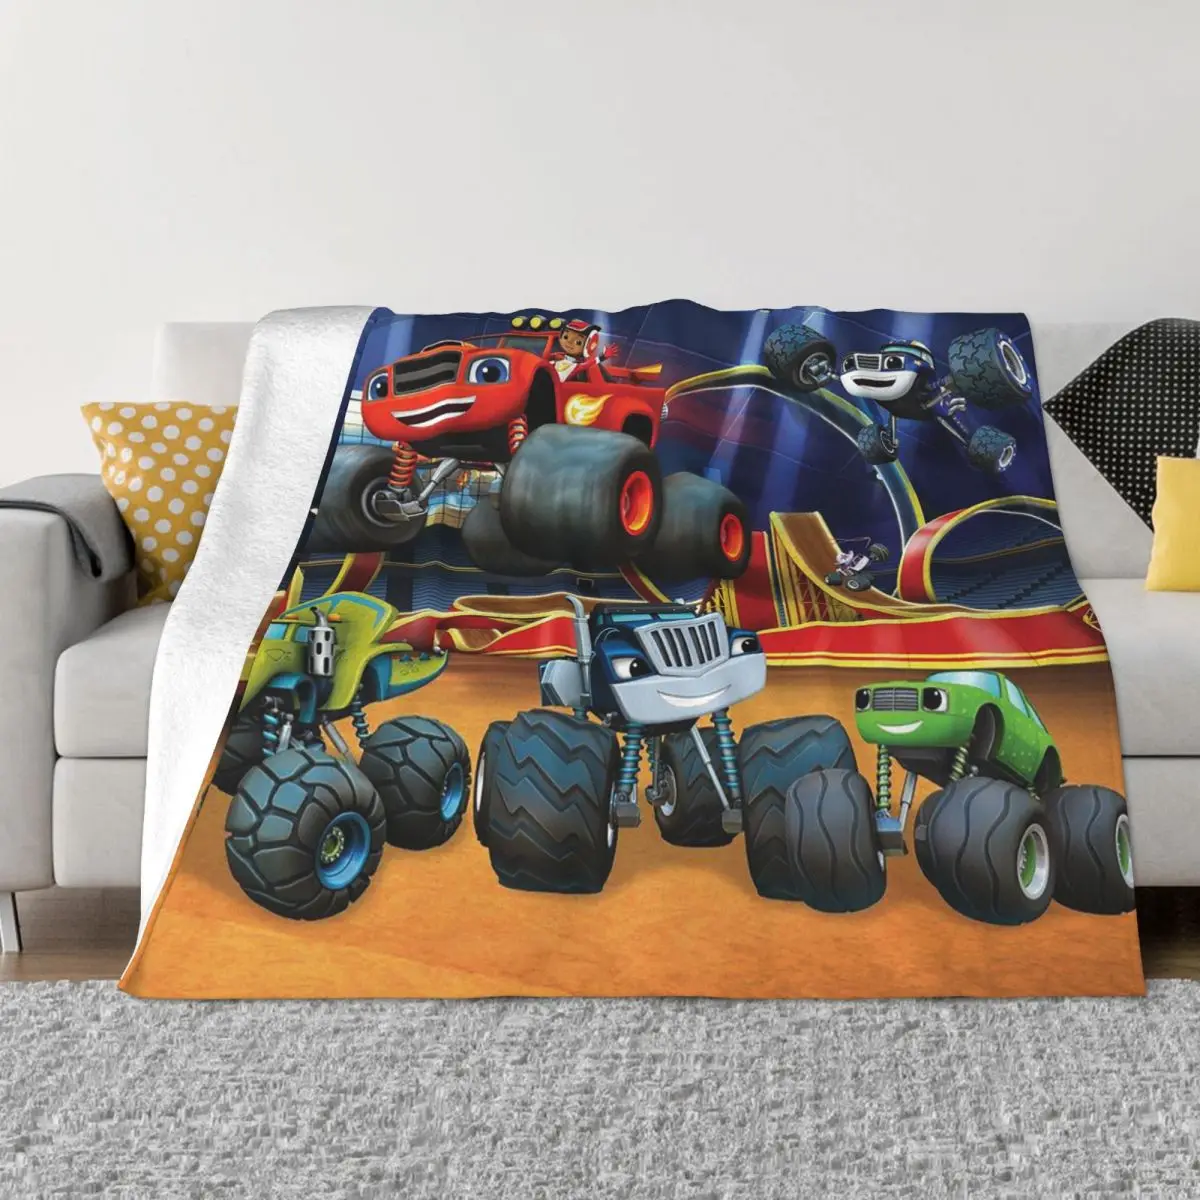 

Upestory Anime Blaze And The Monster Machines Blankets Sofa Cover Fleece Print Warm Throw Blanket for Home Car Rug Piece